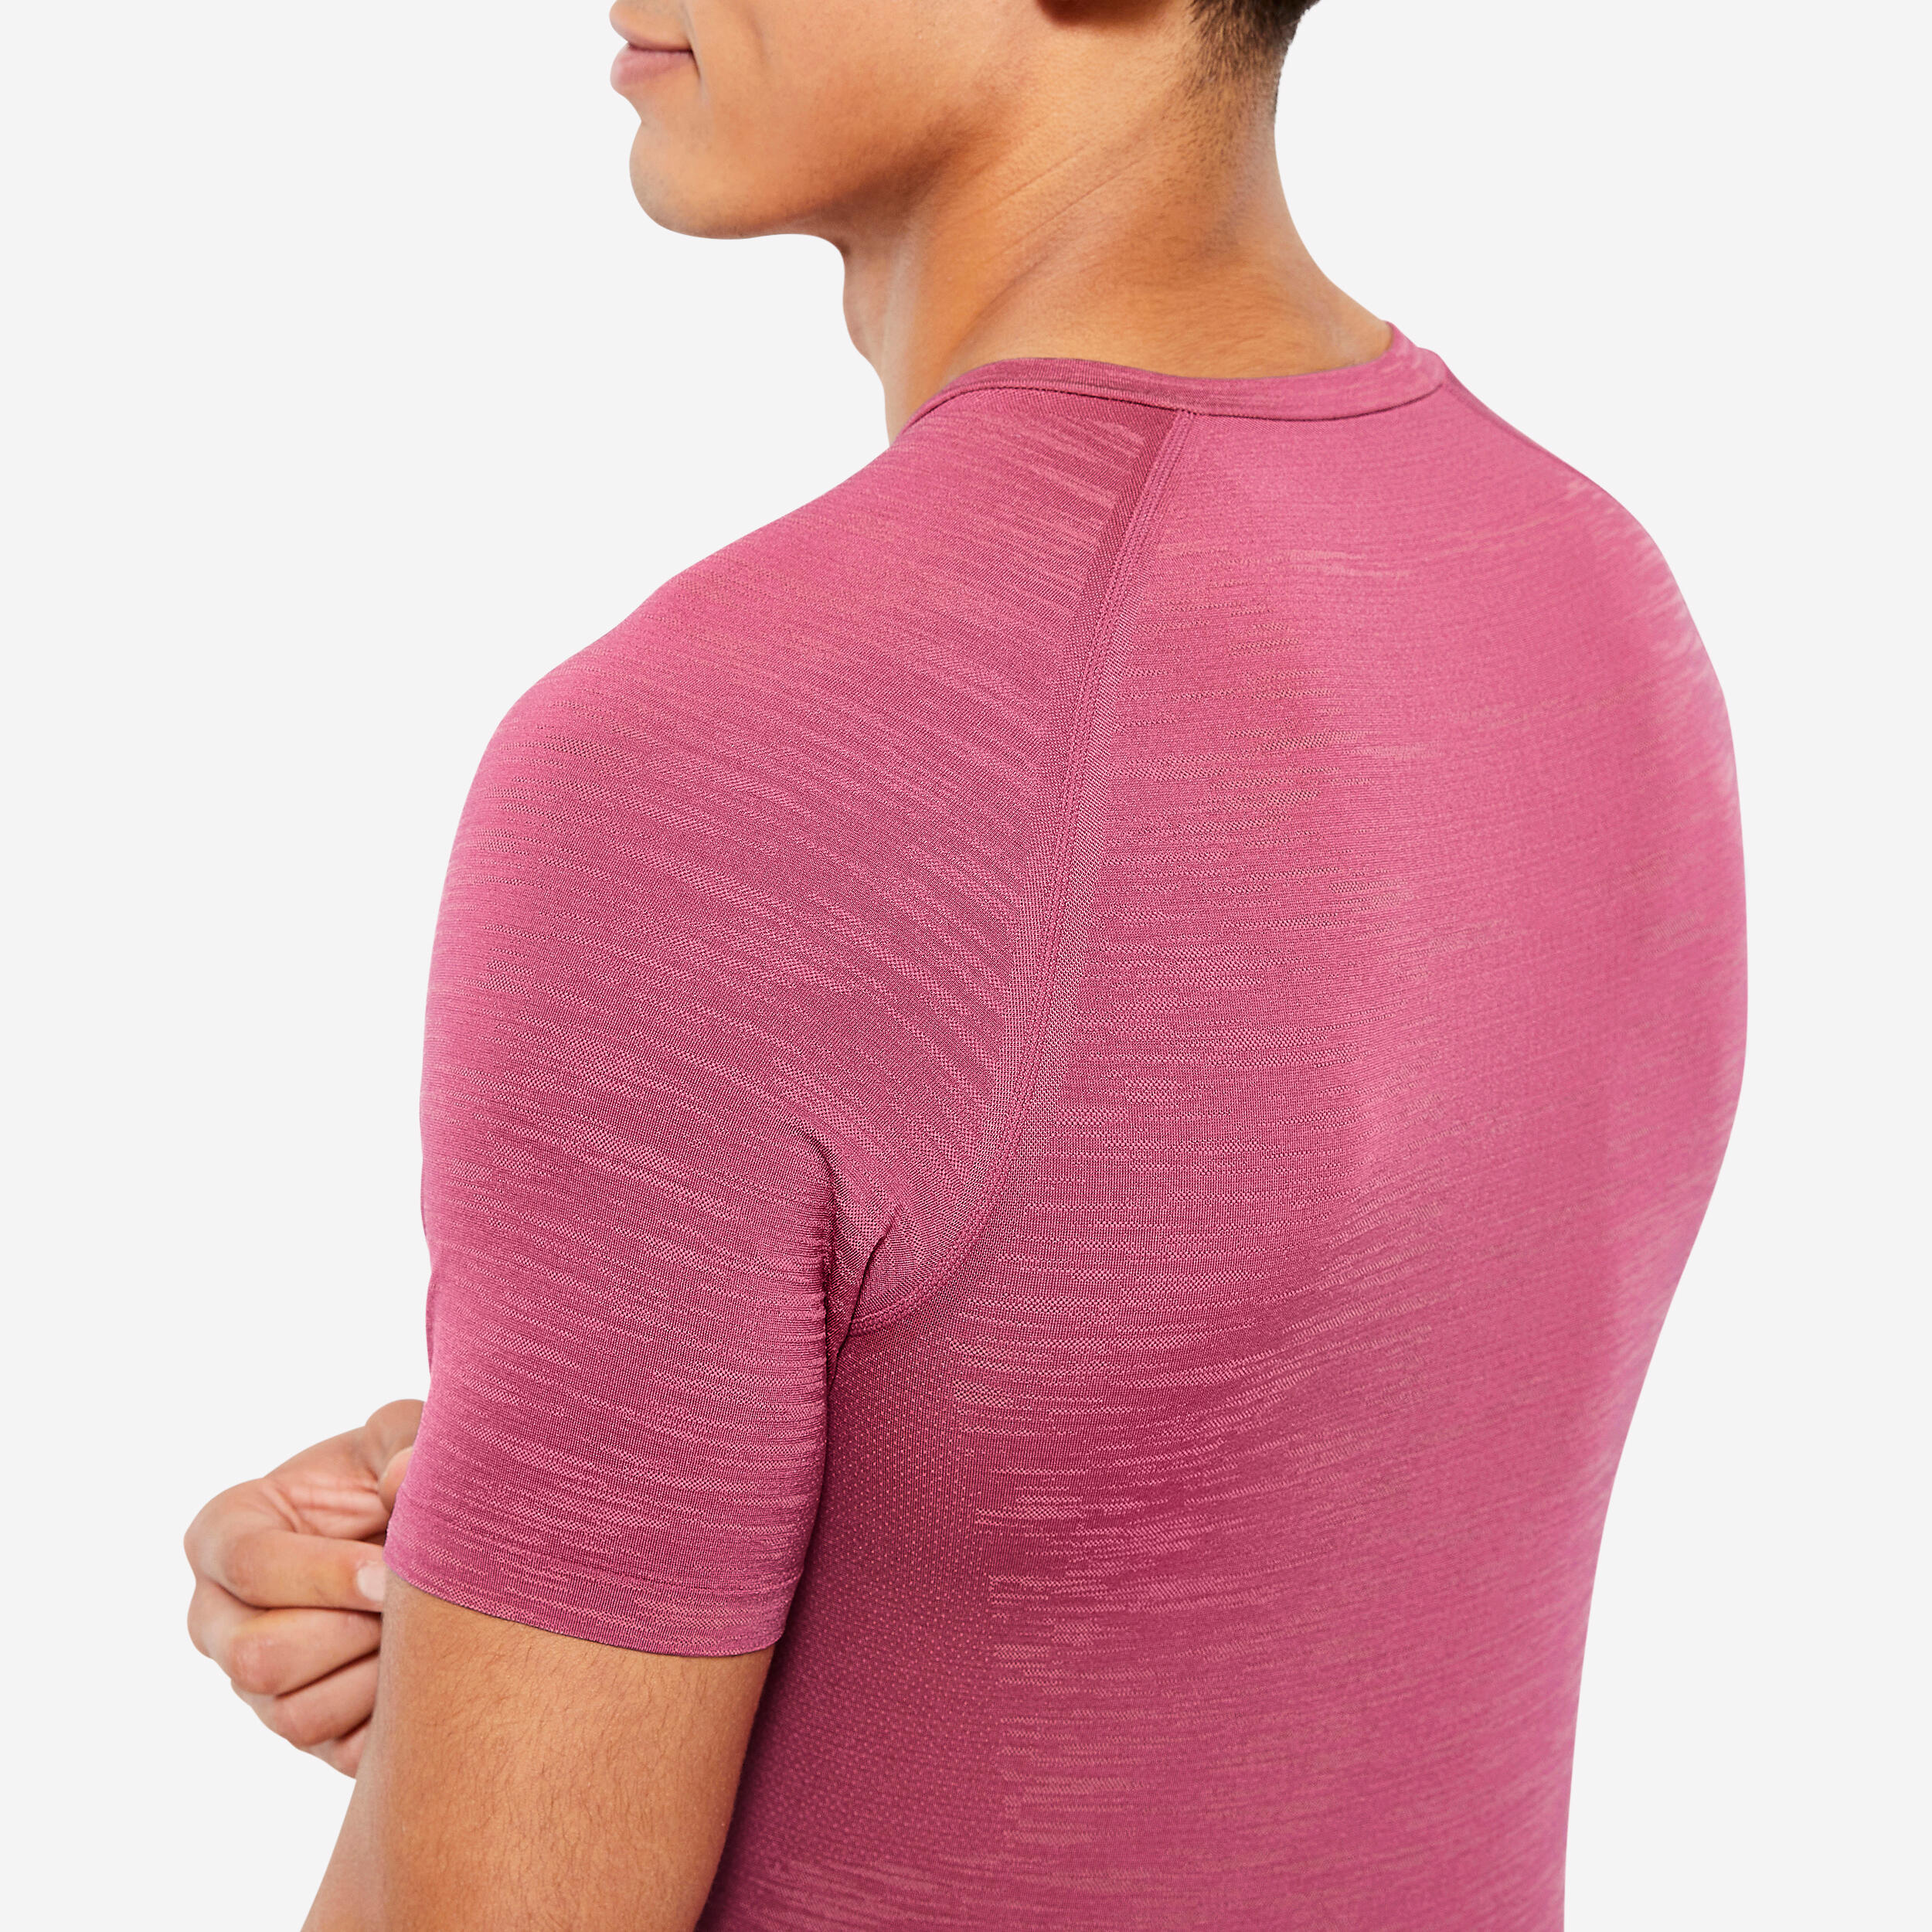 Weight Training Compression T-Shirt - Pink Marl 6/6